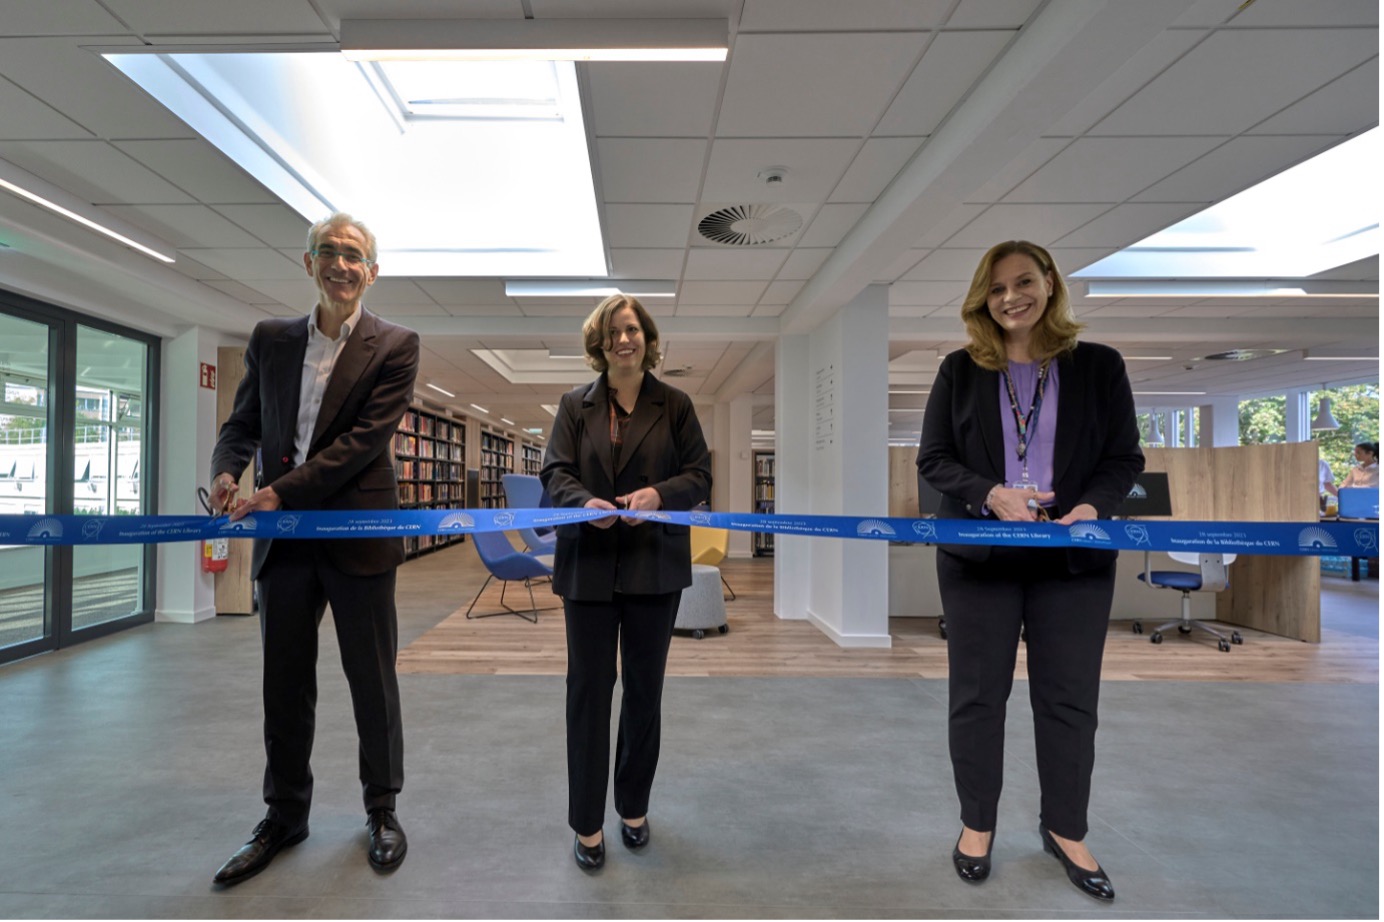 From left to right: Raphaël Bello, Director for Finance and Human Resources, Salomé Rohr, Head Librarian of CERN and Charlotte Lindberg Warakaulle, Director for International Relations